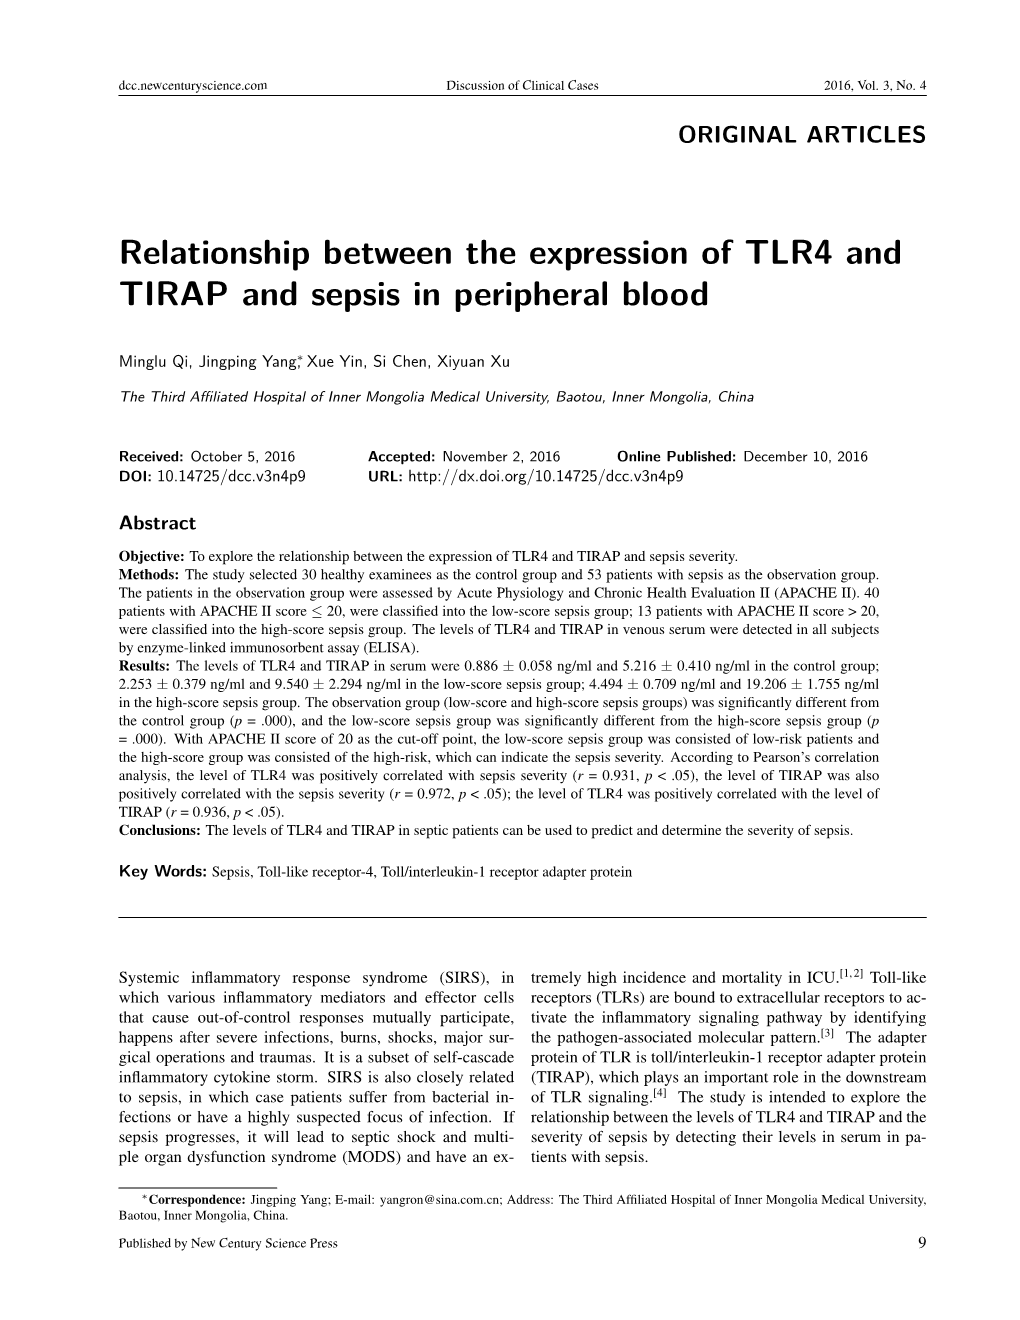 Relationship Between the Expression of TLR4 and TIRAP and Sepsis in Peripheral Blood